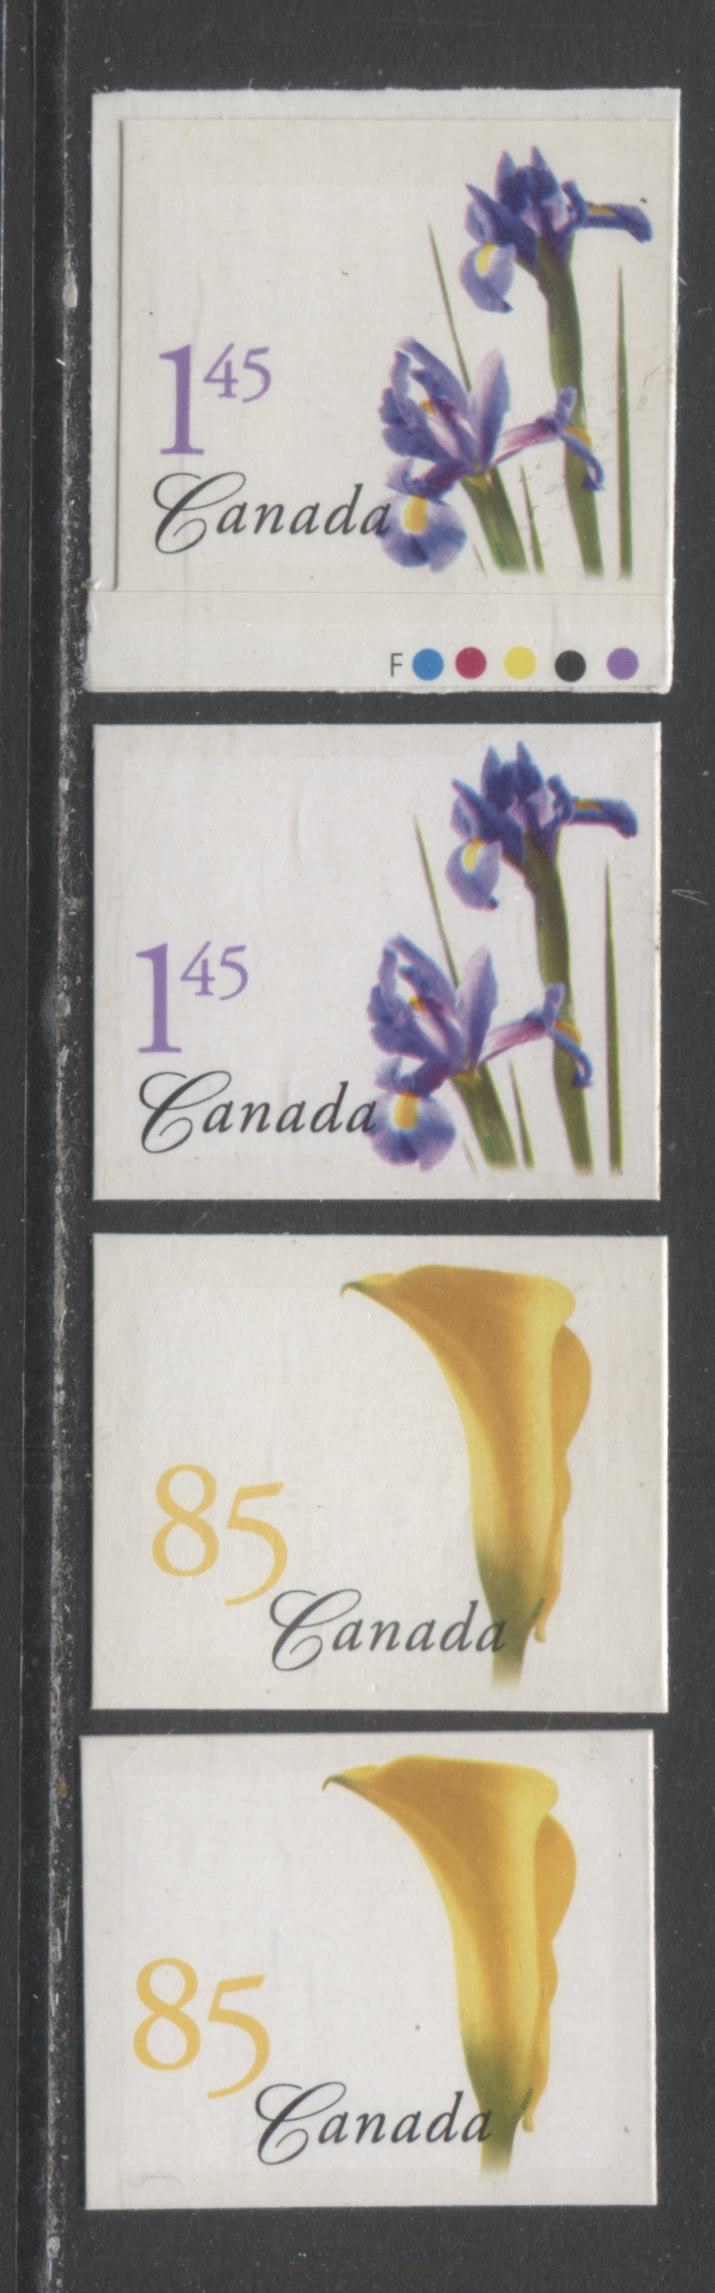 Lot 14 Canada #2081-2082i 85c-$1.45 Multicolored Yellow Calla Lily-Purple Dutch Iris, 2004 Flower Definitives - Bookets Issue, 4 VFNH Singles With Both 3mm & 4mm Tagging Varieties $9.75